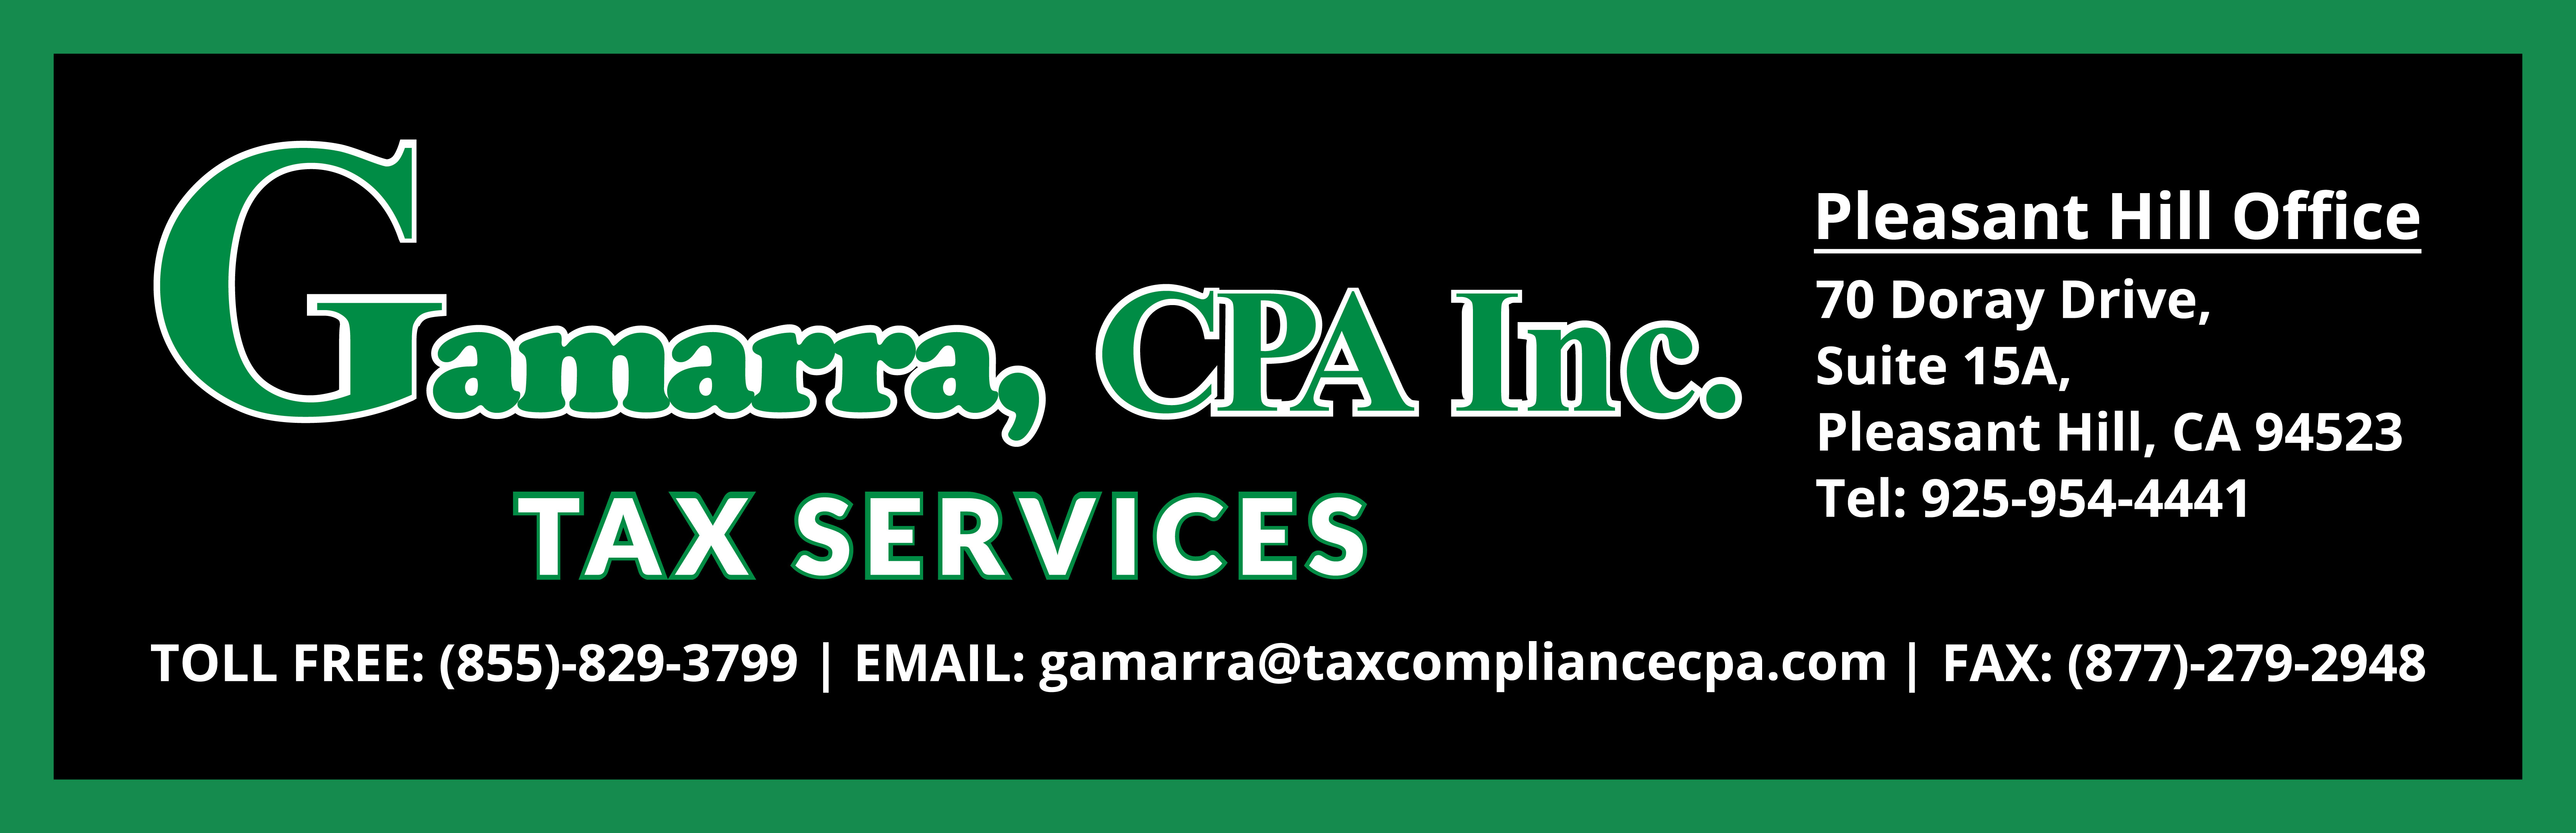 Gamarra CPA Tax Services with offices in Washington DC, Concord CA, and Pleasant Hill, CA. Specialization includes individual and small business tax preparation.  Call us at 925-954-4441